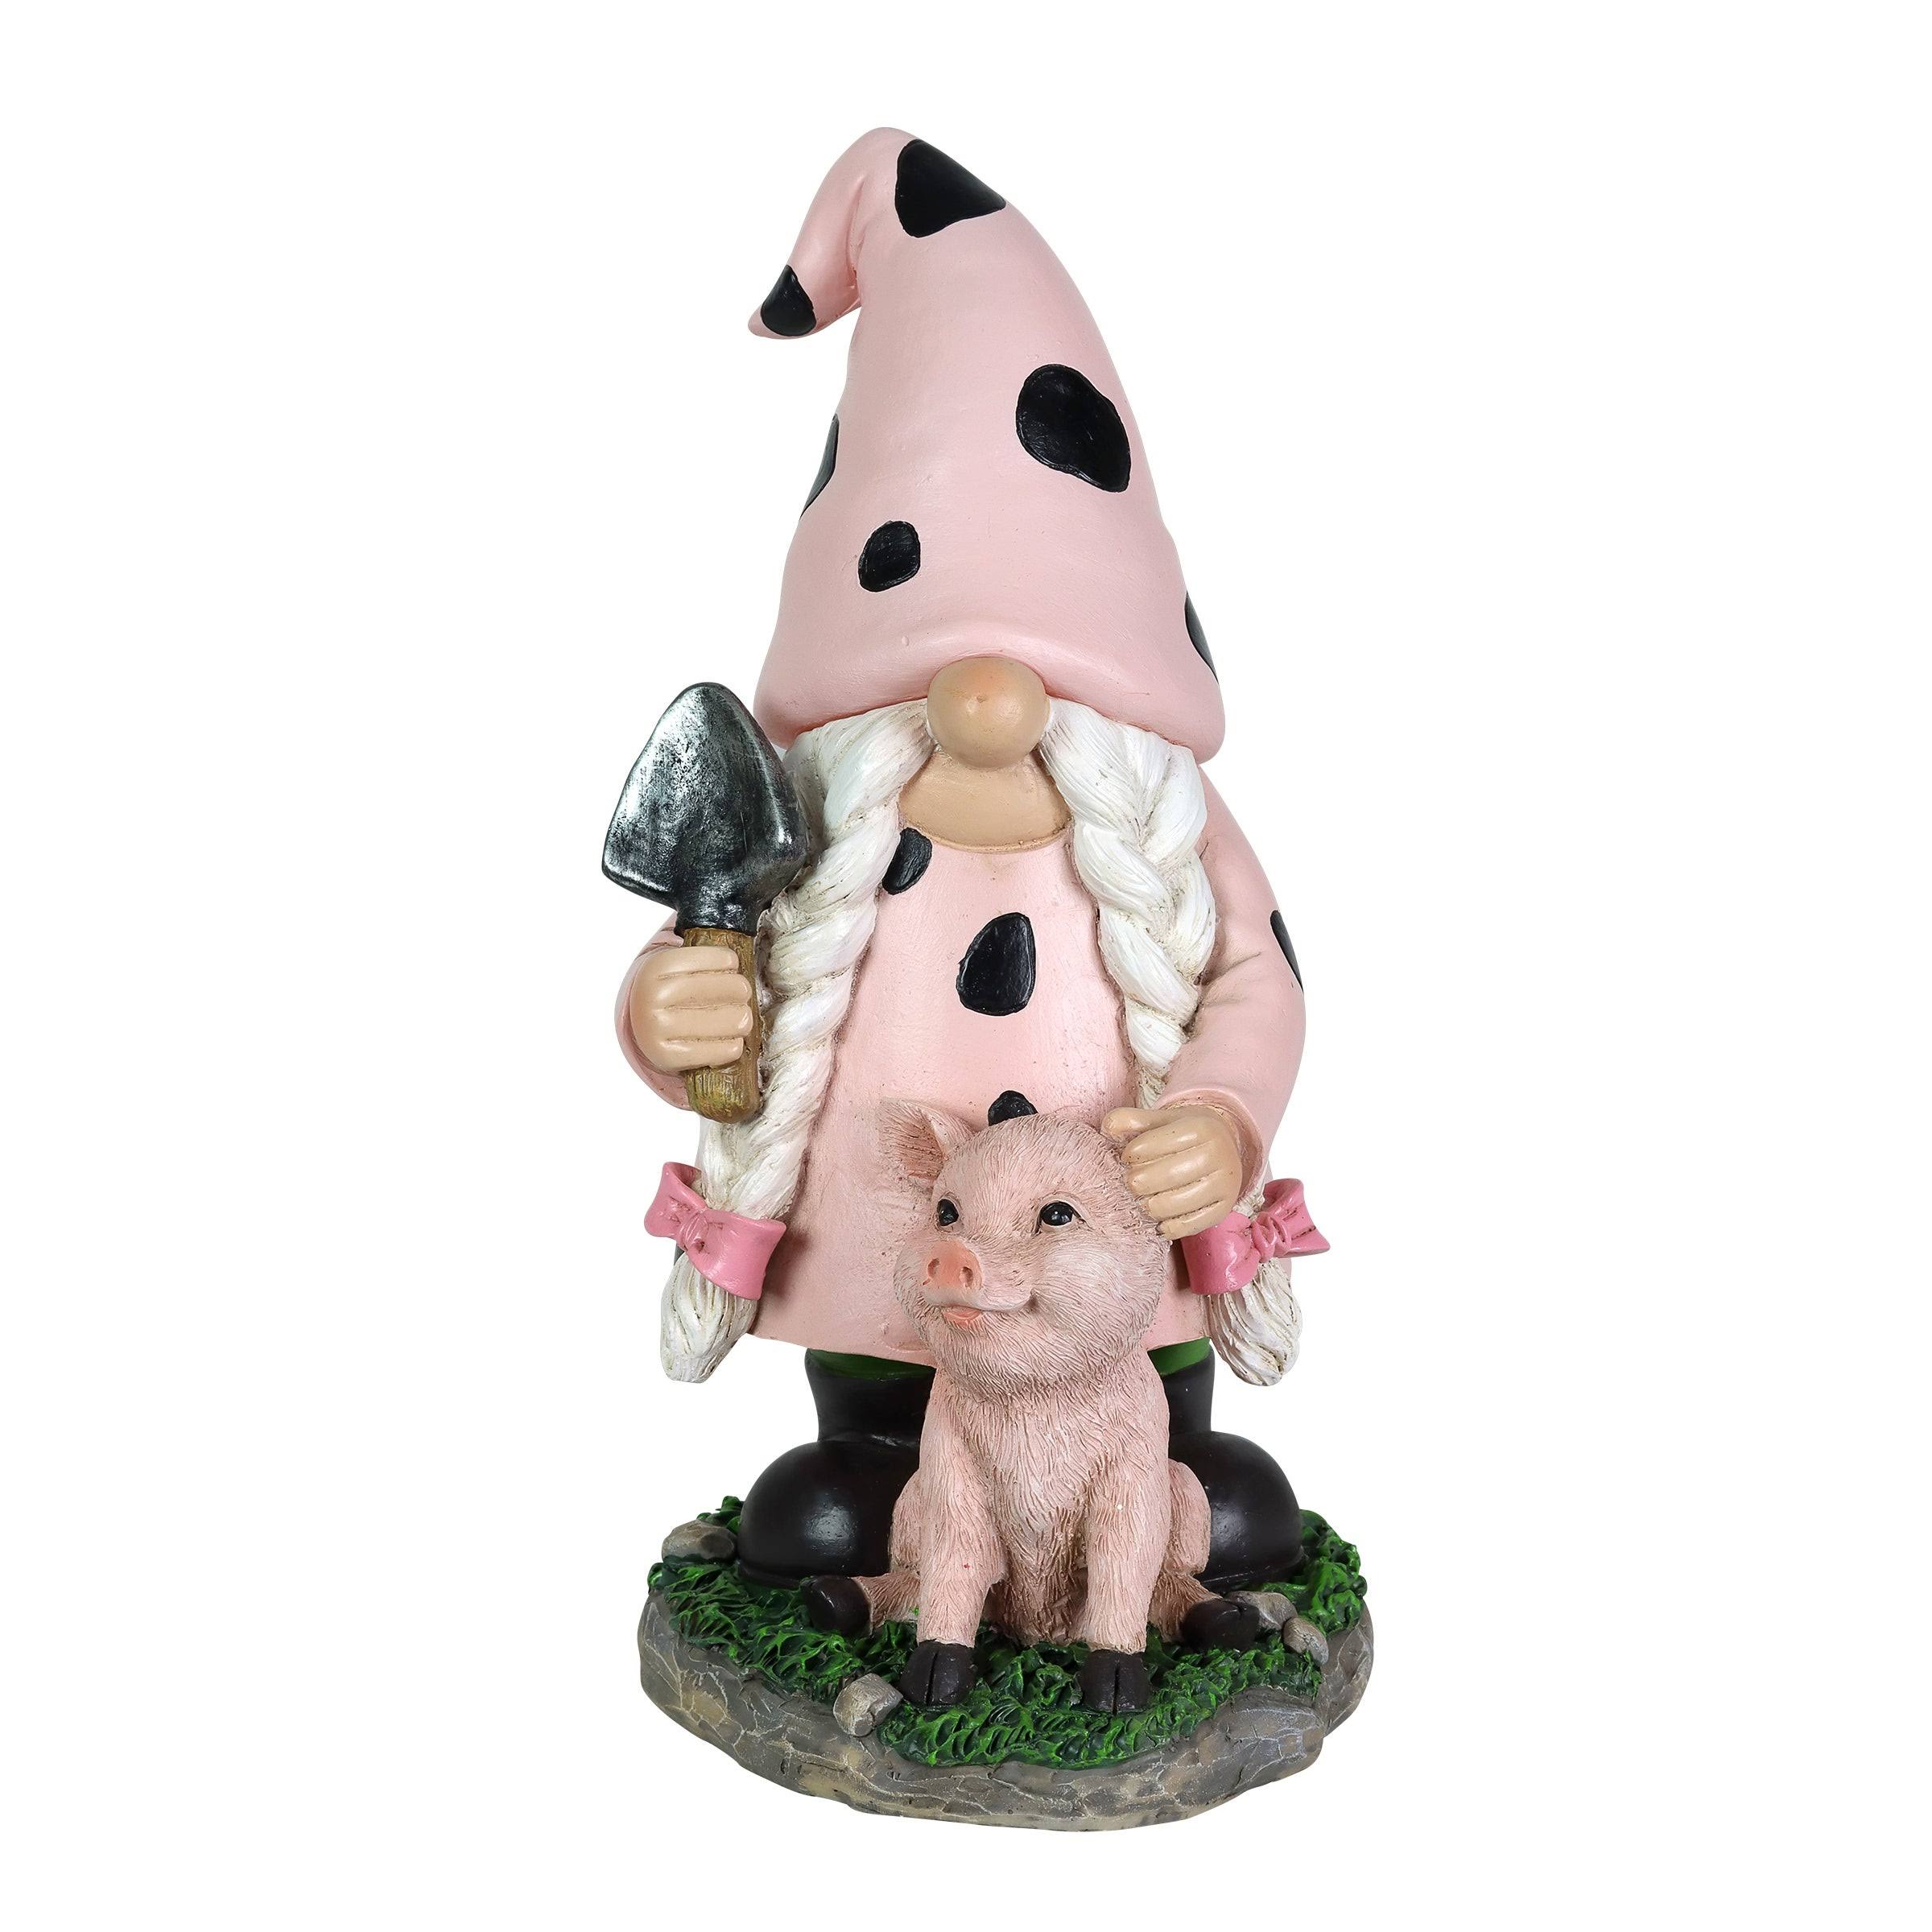 Exhart Solar Lady Gnome with Pink Print and Piglet Statue, 6 by 10 Inches - Resin - Multi